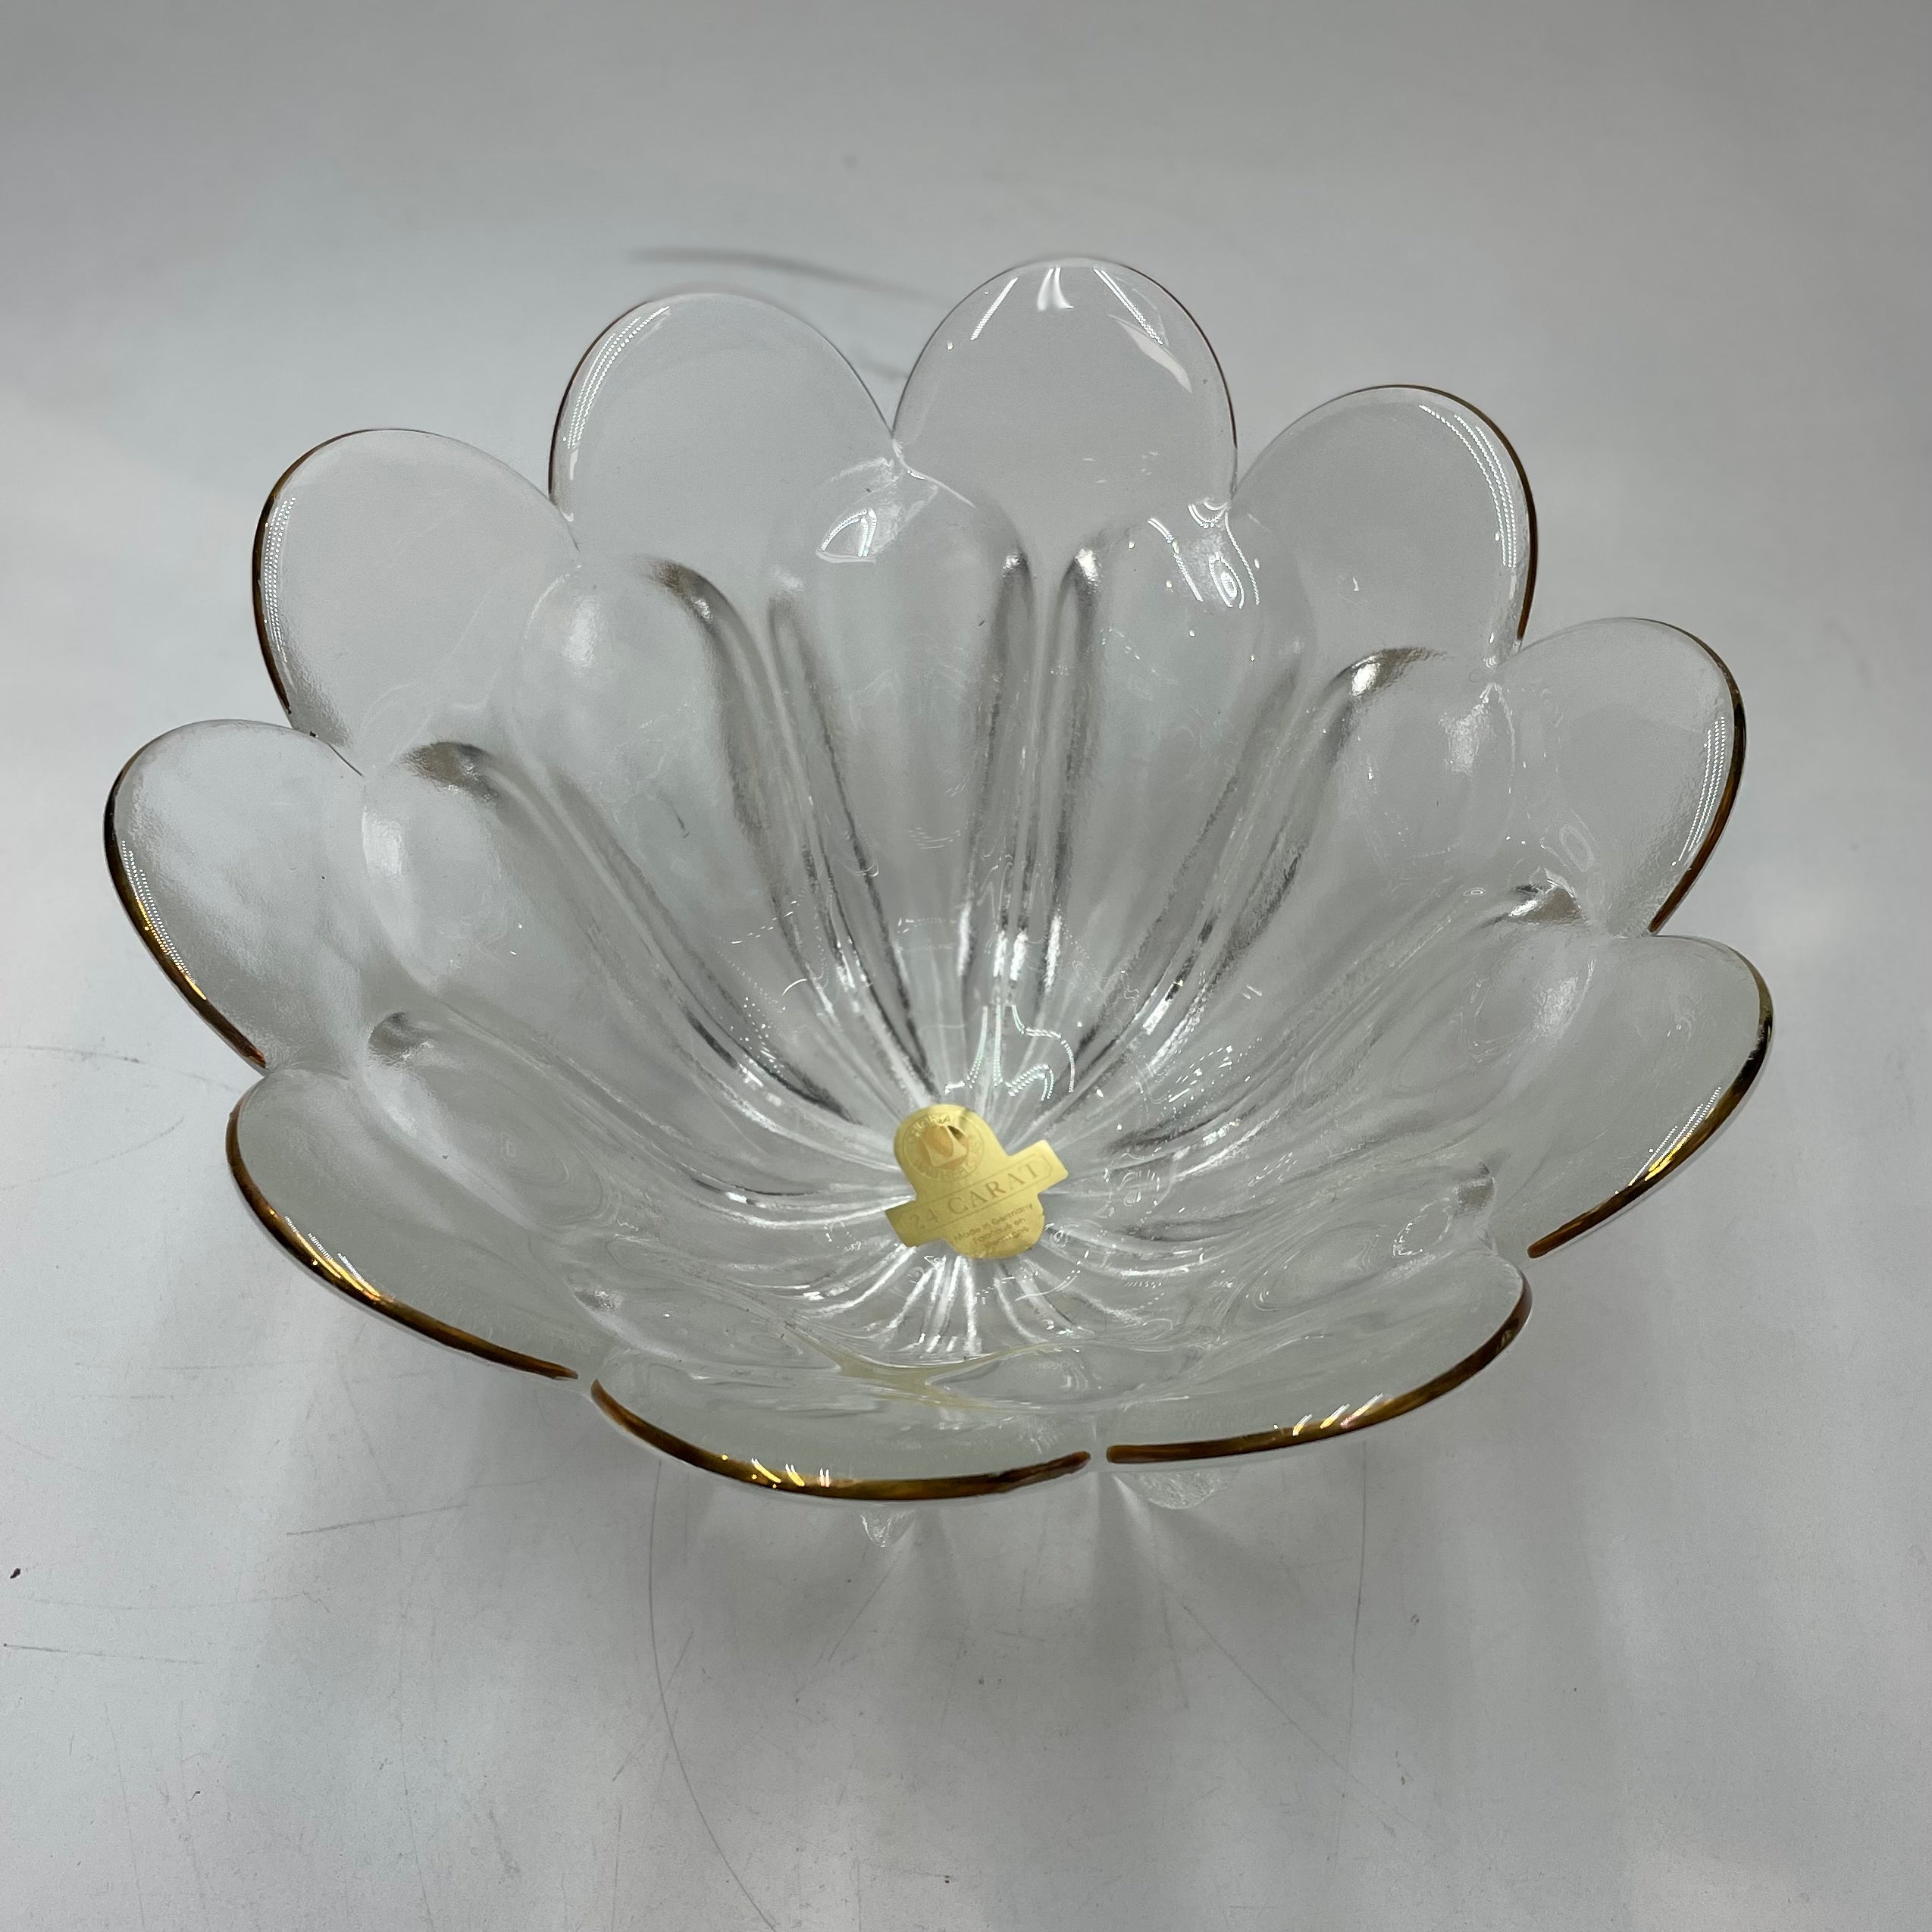 Walther Glas German Crystal Bowl with 24K Gold Rim